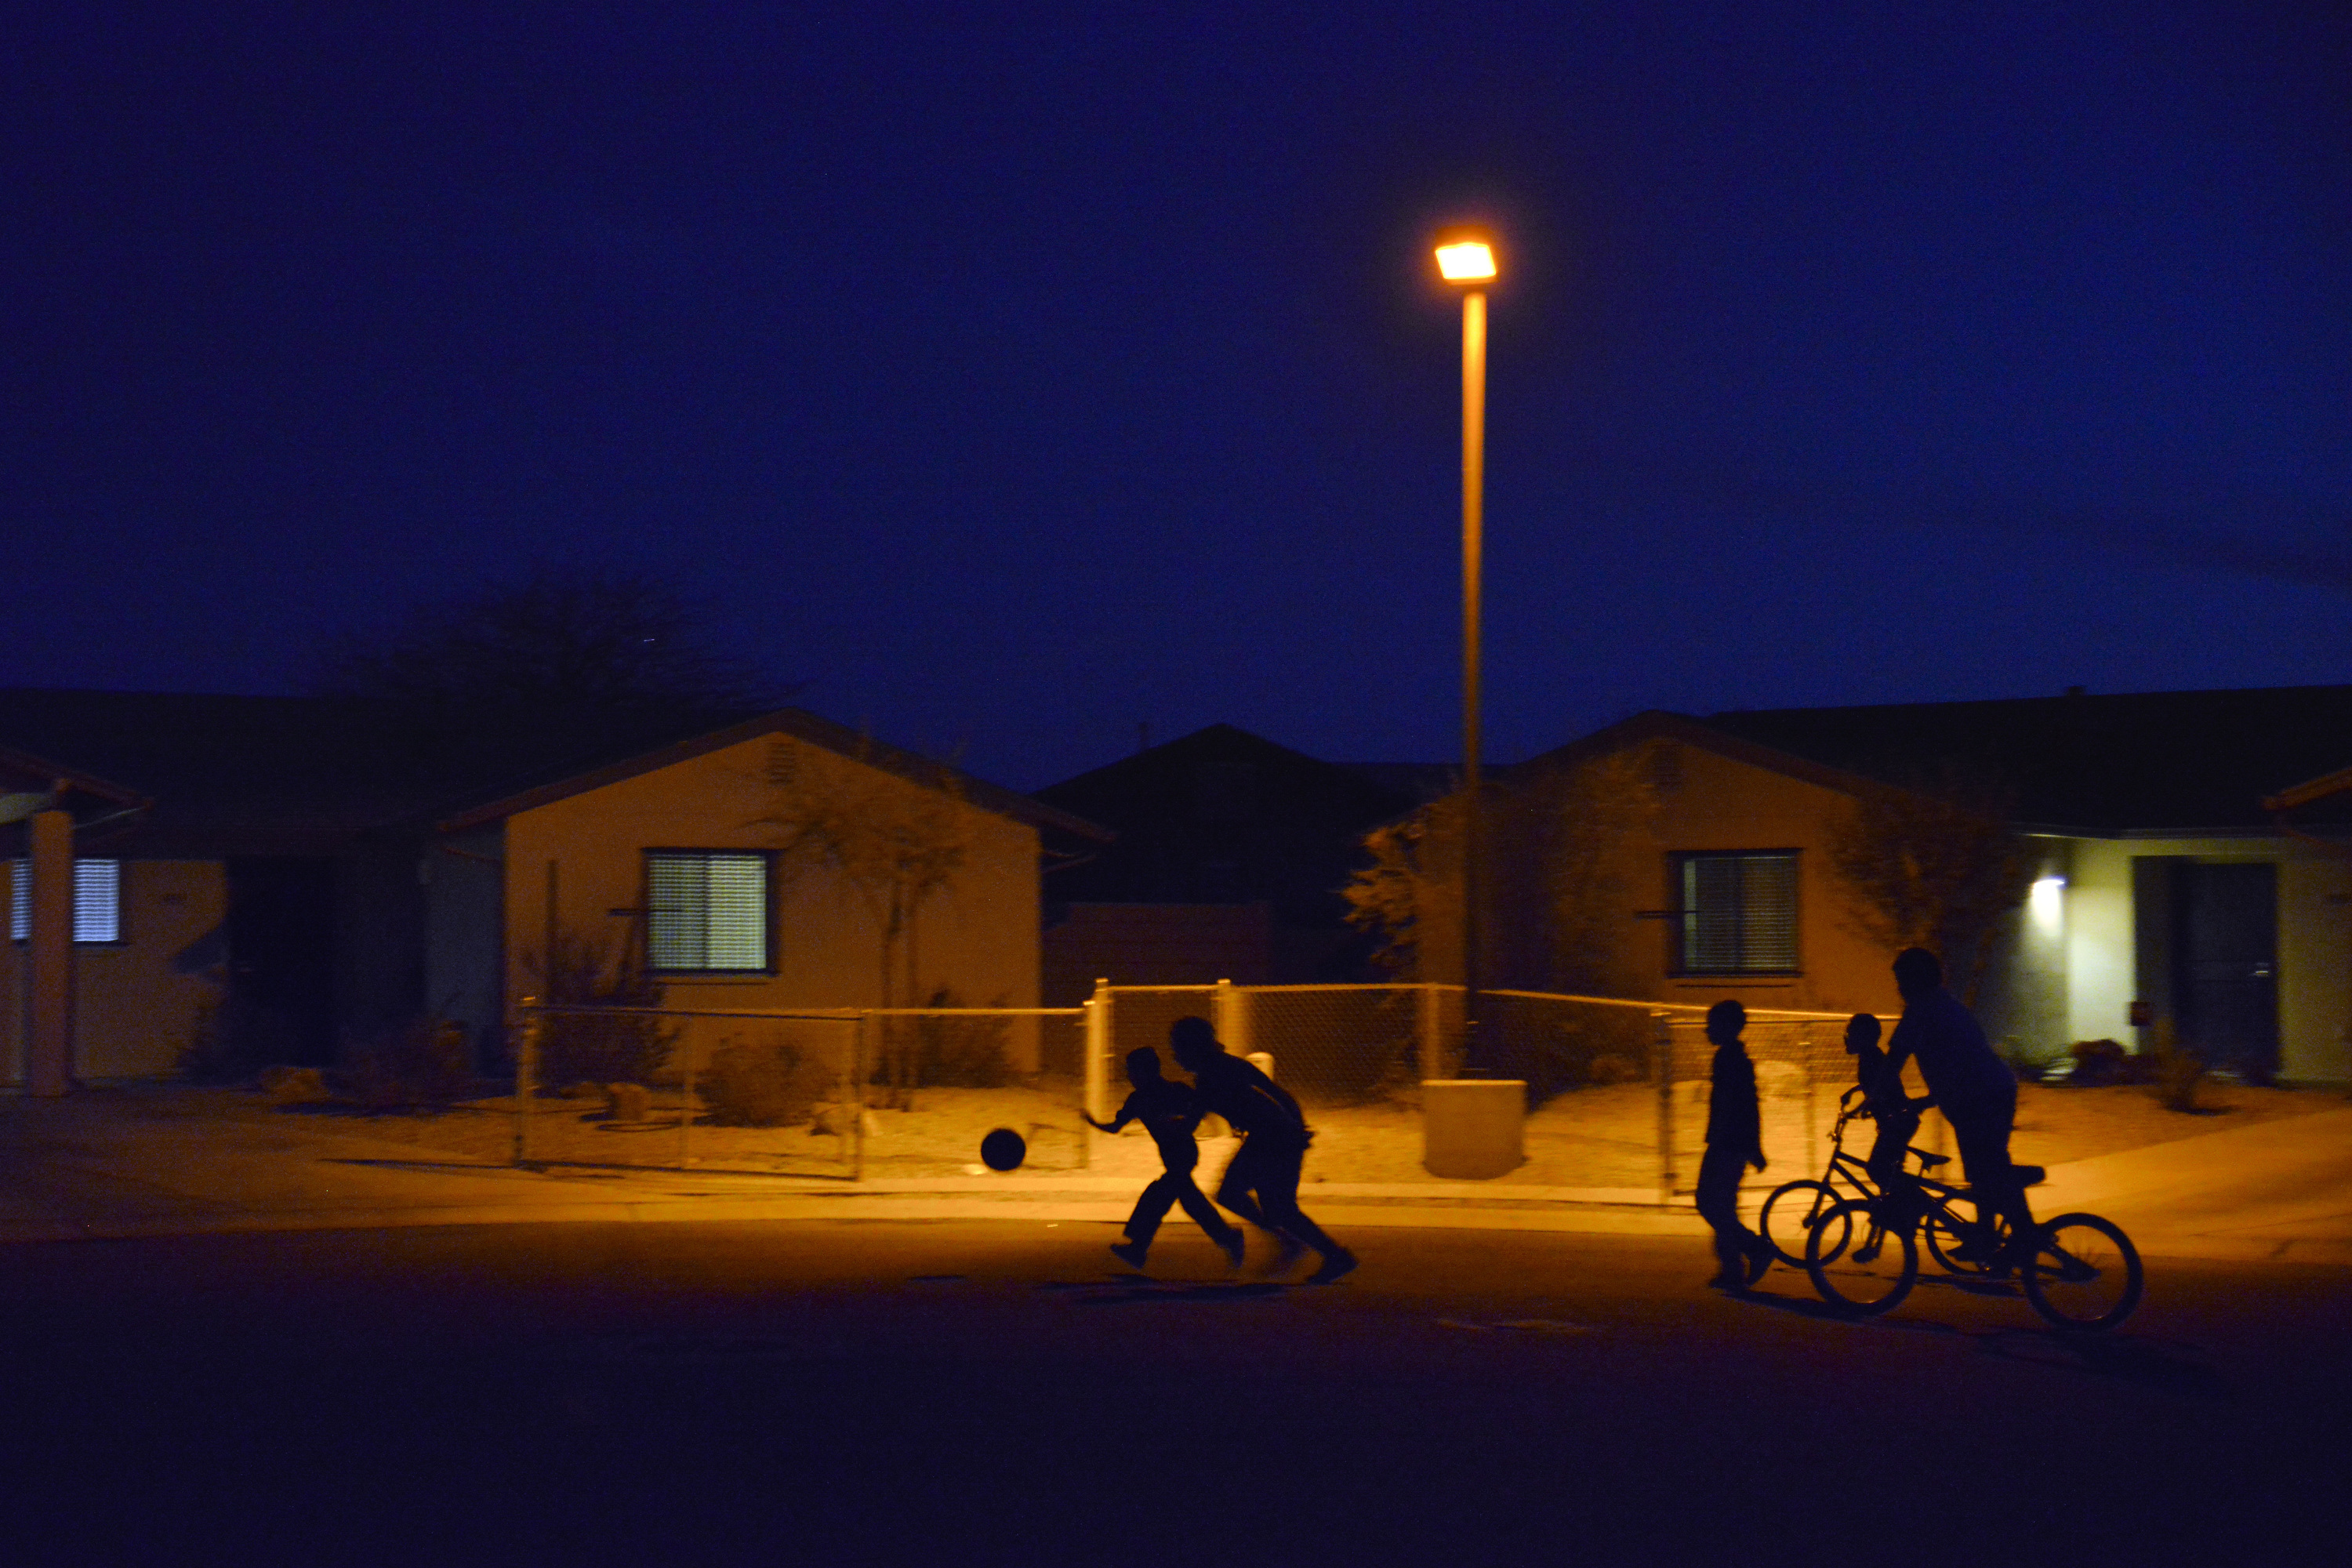 Kids play in the street on the Pascua Yaqui Indian Reservation, Ariz. on March 18, 2014.